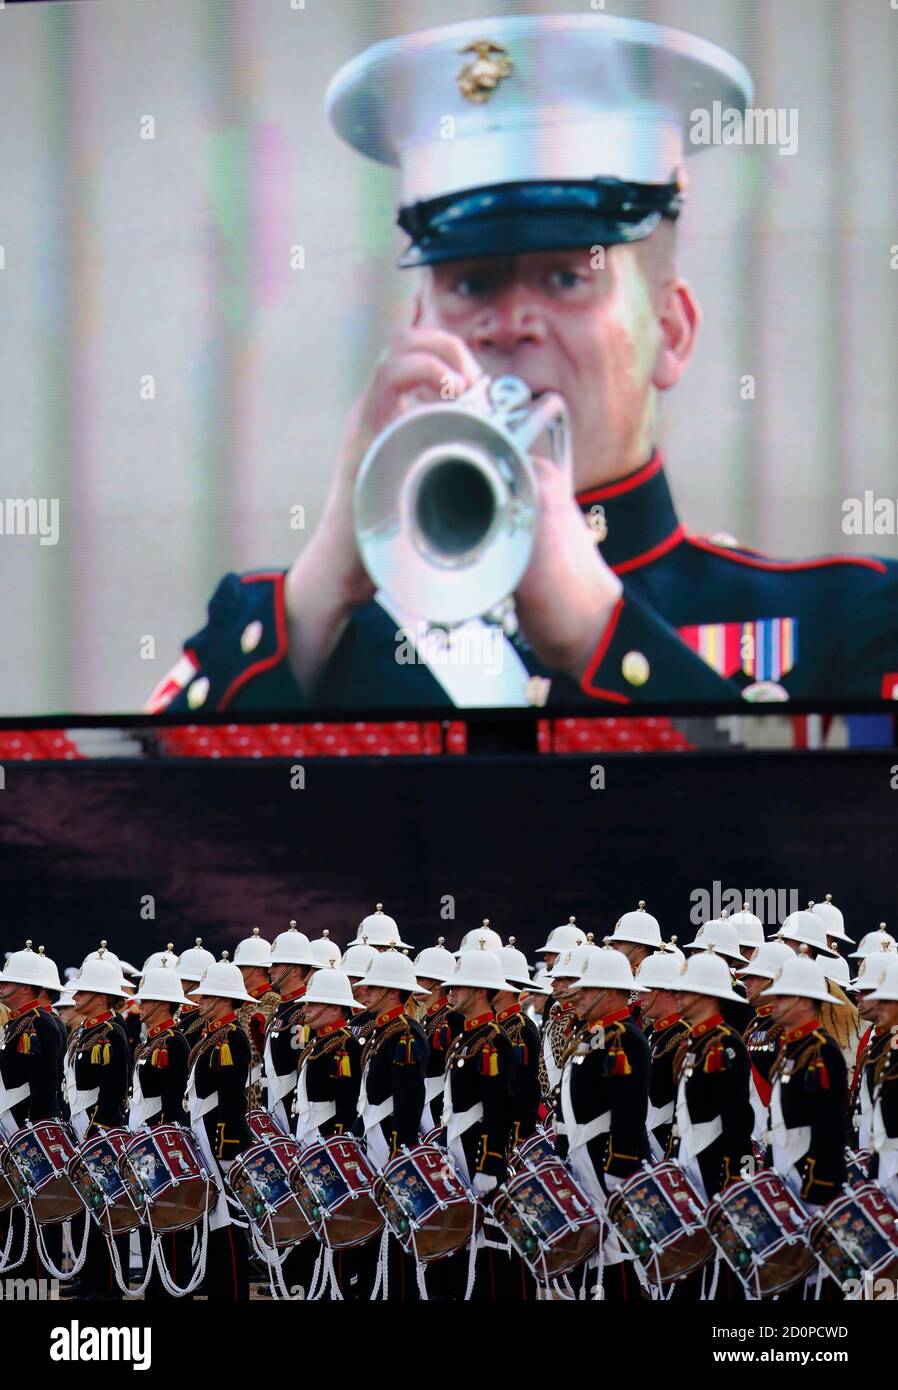 Musicians of the Royal Marines (bottom) perform alongside soldiers from the 2nd Marine Division Band, United States Marine Corps (top) in the largest 'Beating Retreat' military pageant in front of Britain's Prince Philip, which is also attended by Queen Elizabeth, at the Horse Guards Parade in London June 4, 2014. A total of 490 military personnel and musicians performed in the annual 'Beating Retreat' this year to celebrate the 350th anniversary of the Royal Marines. REUTERS/Luke MacGregor (BRITAIN - Tags: MILITARY ROYALS ANNIVERSARY POLITICS) Stock Photo